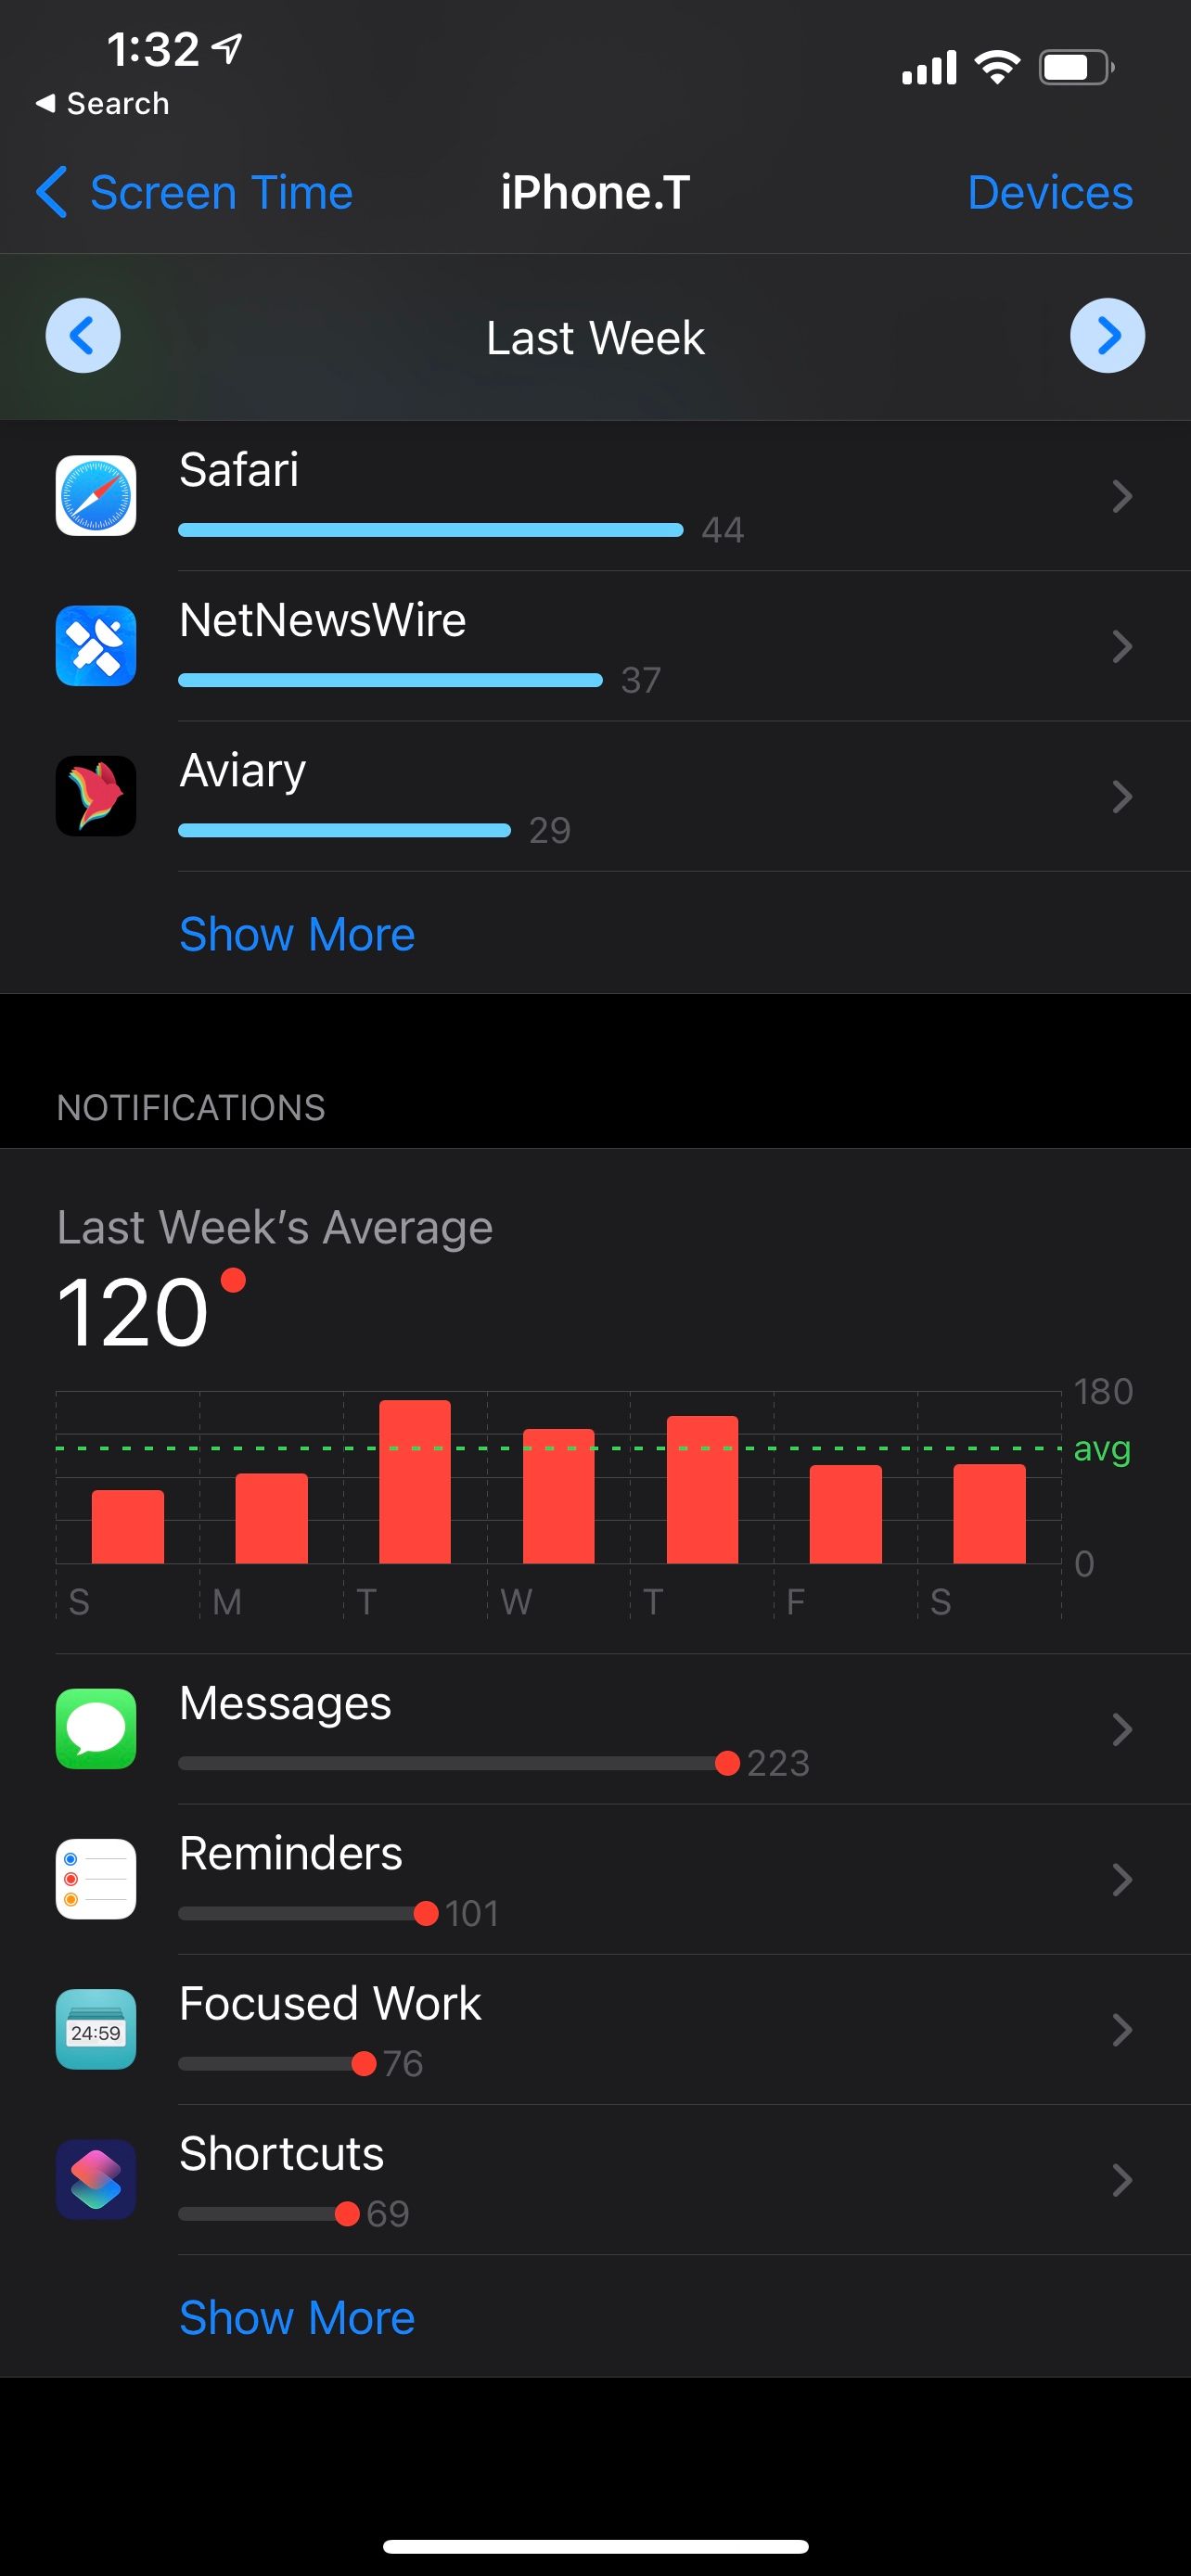 Notifications section in Screen Time on iOS